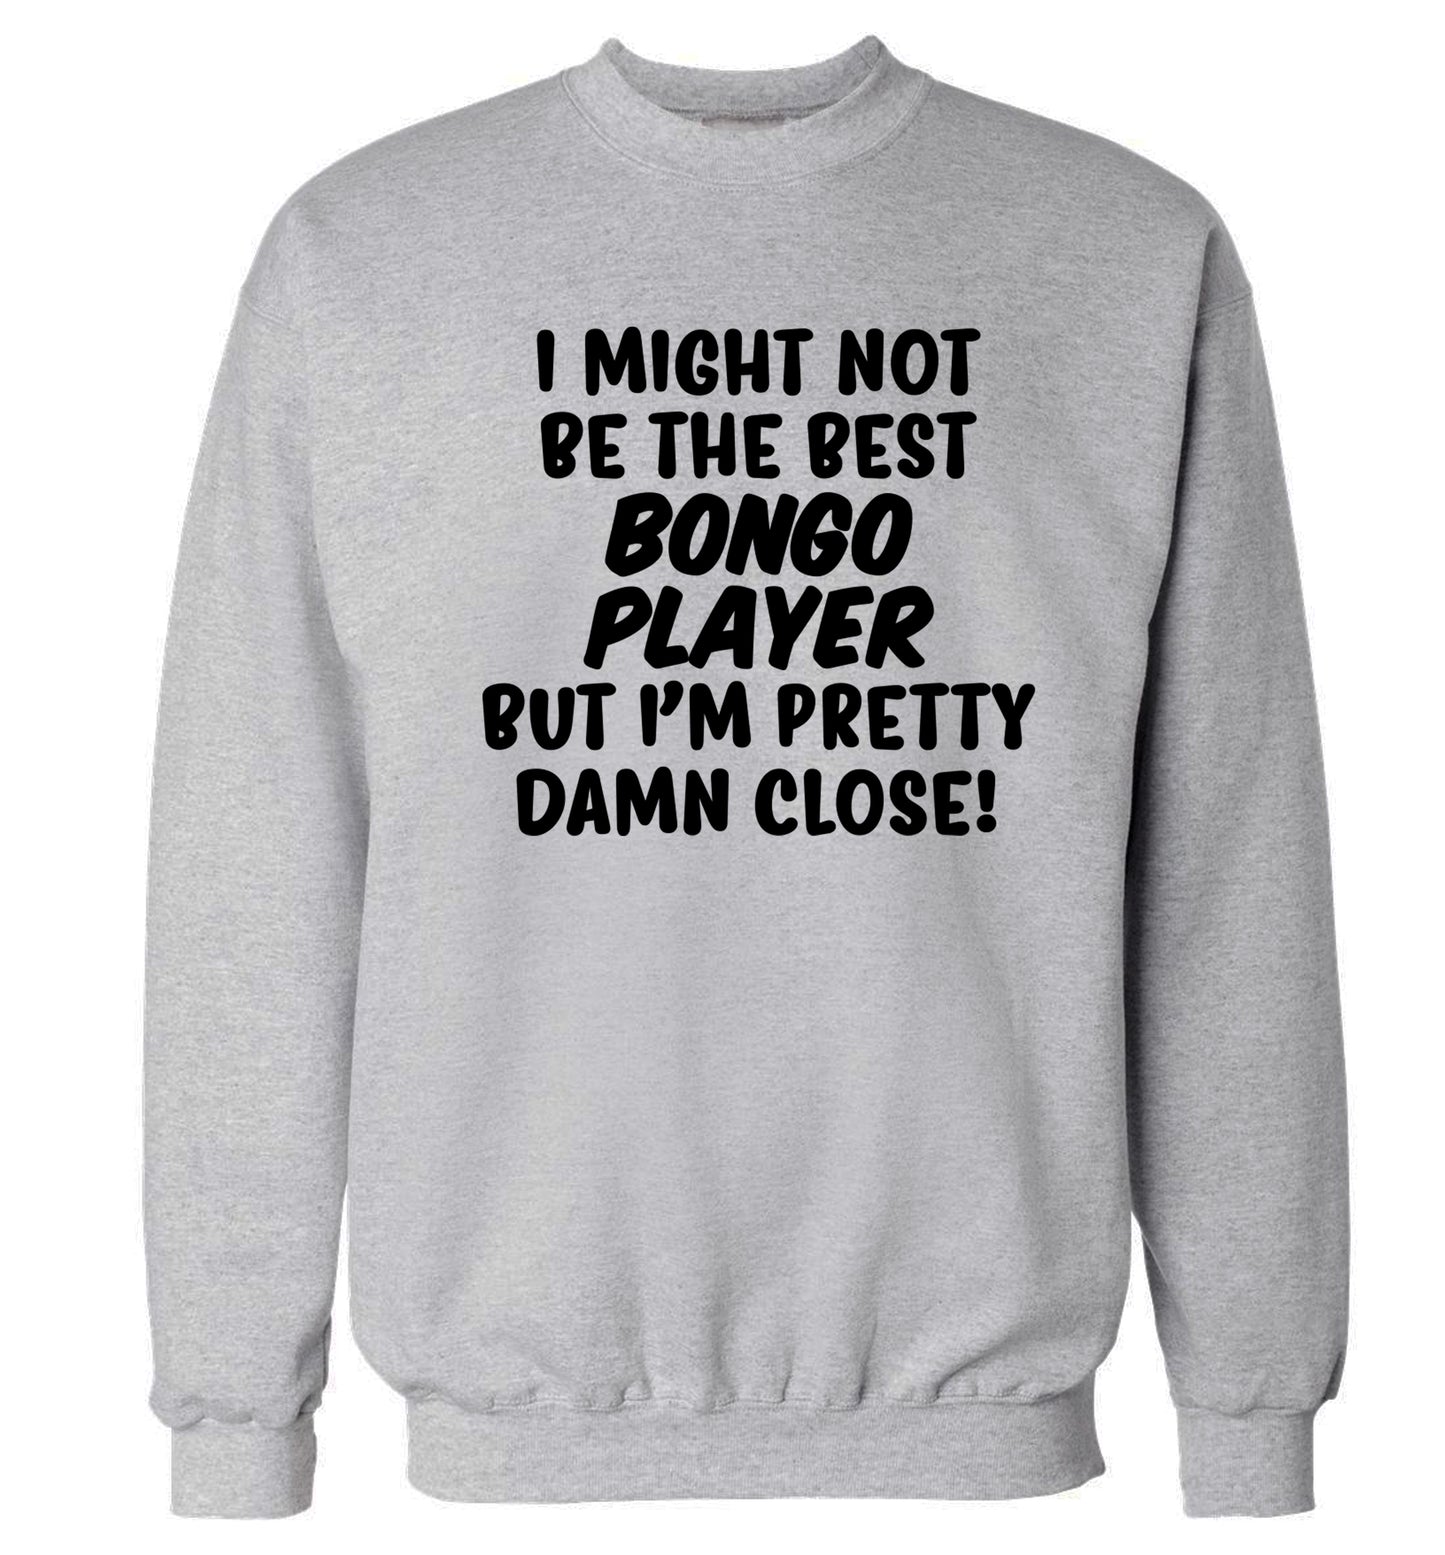 I might not be the best bongo player but I'm pretty close! Adult's unisexgrey Sweater 2XL